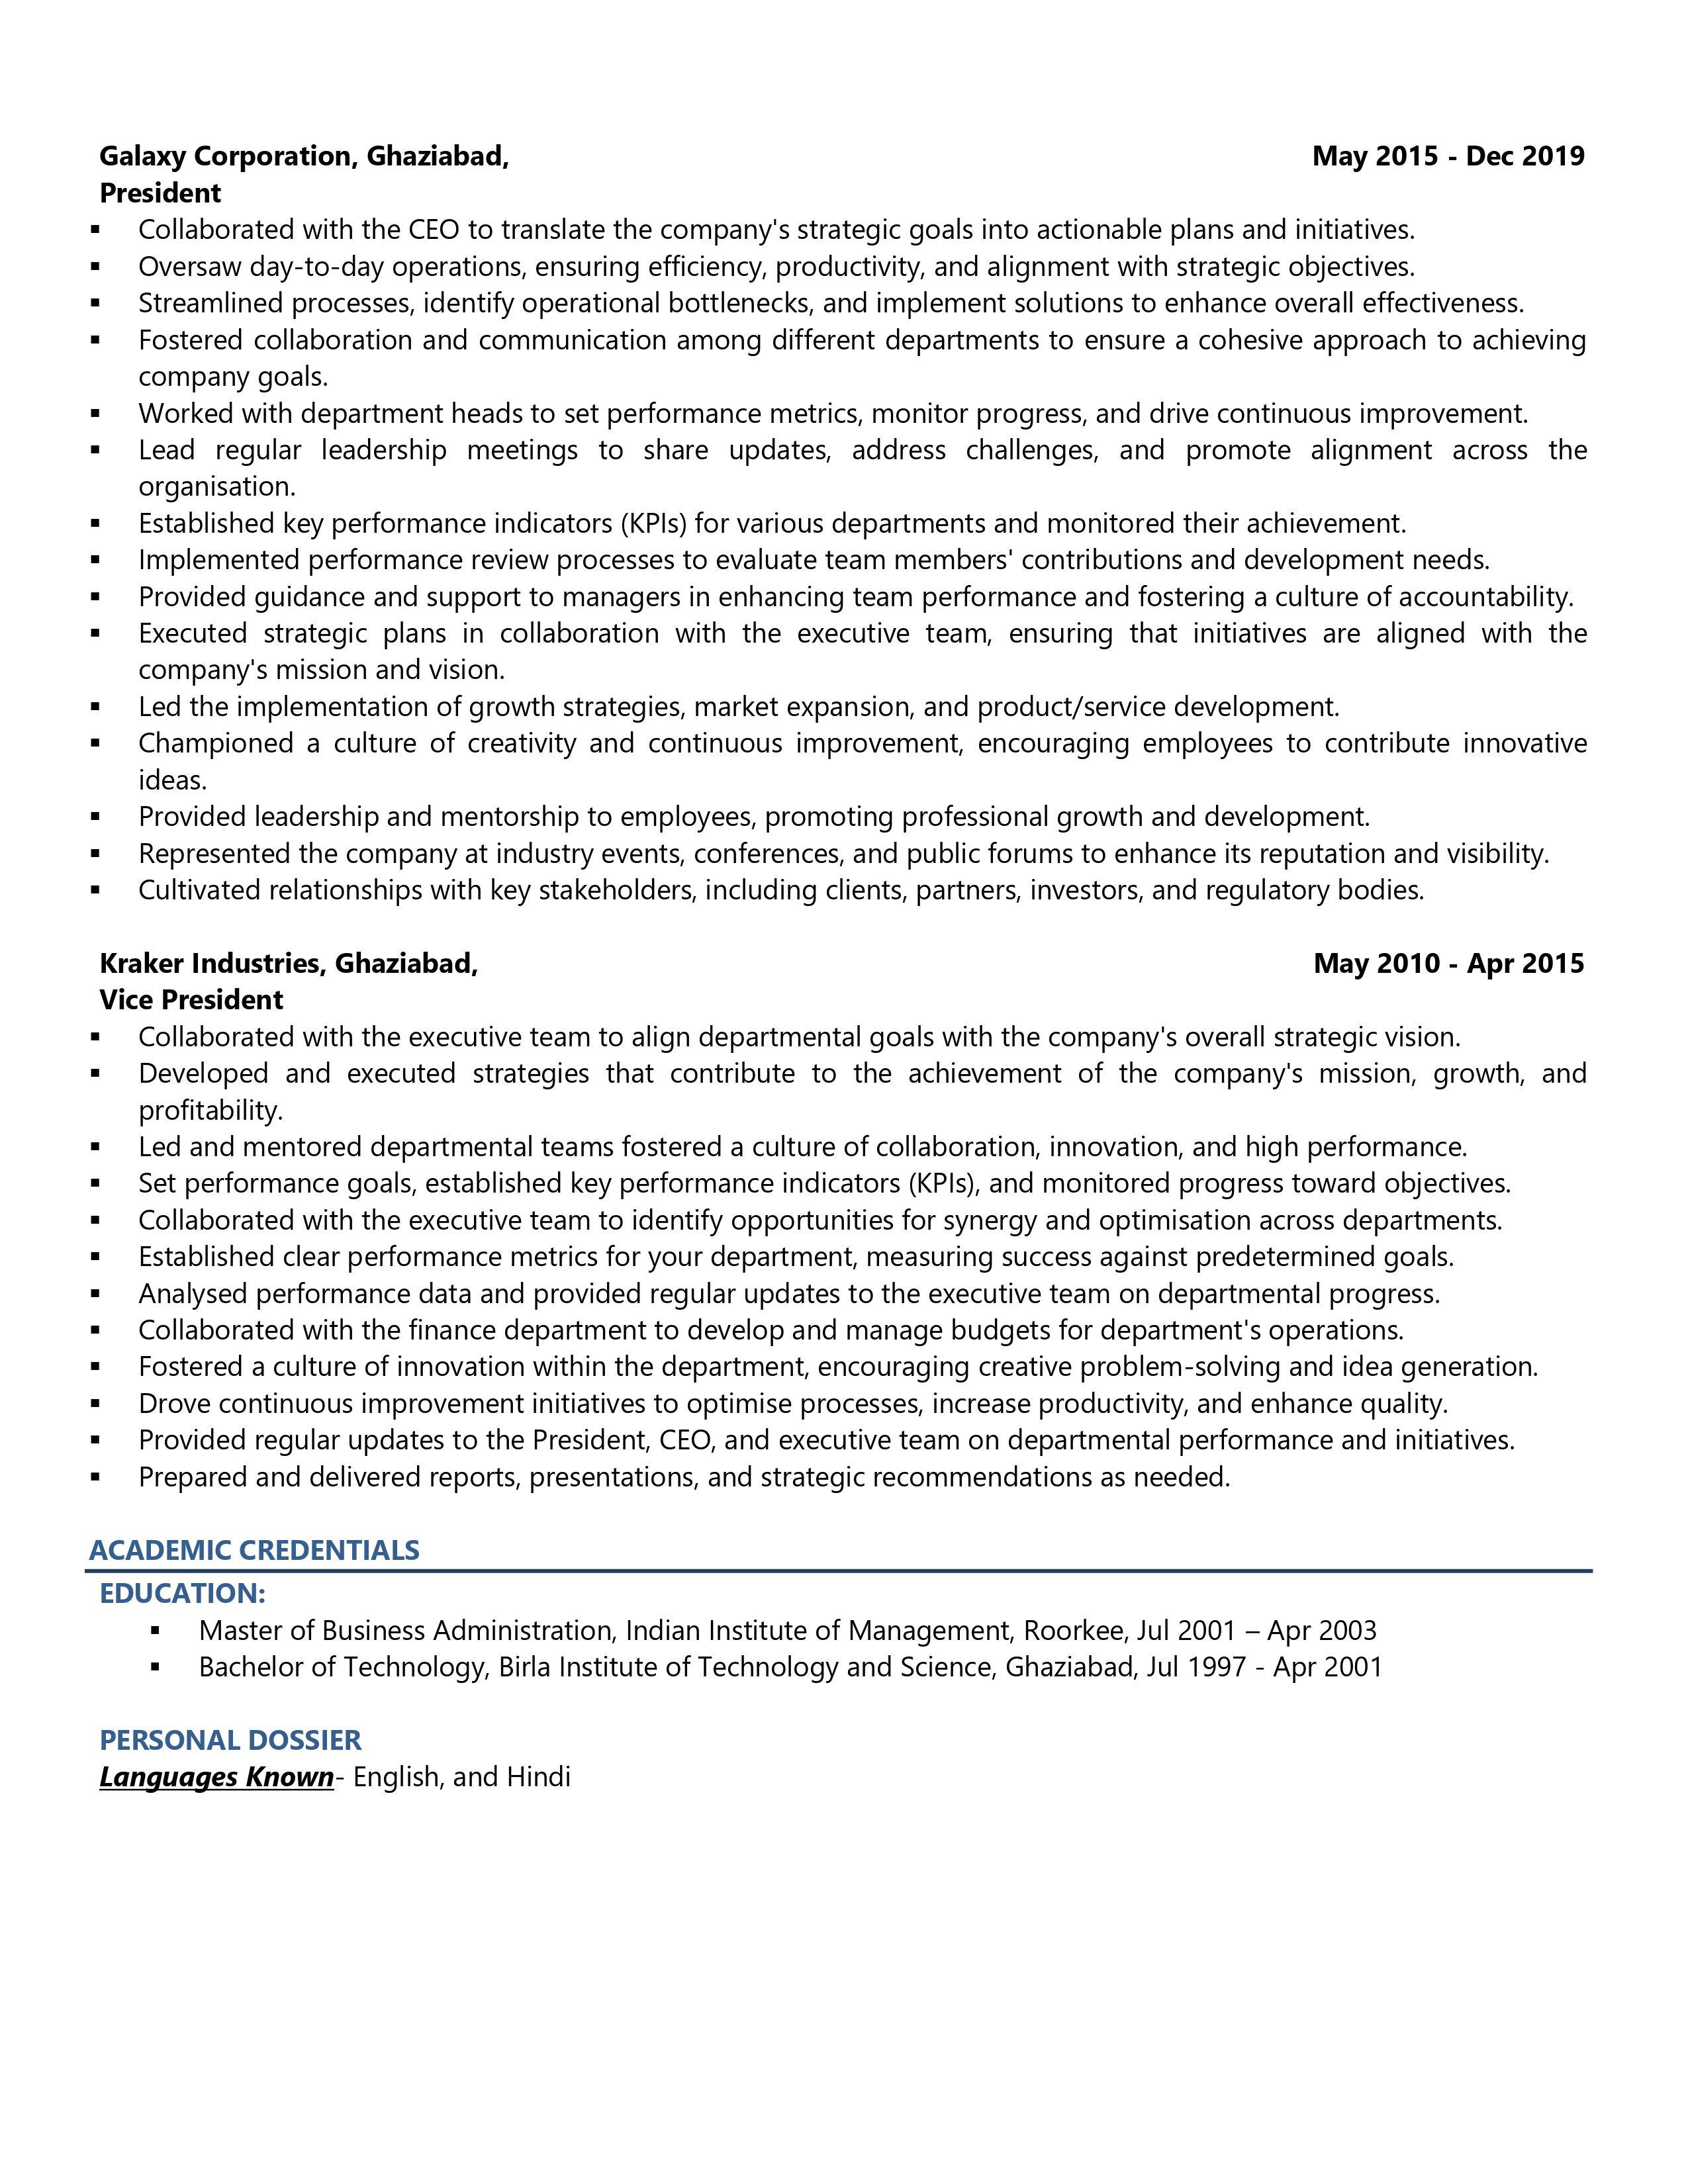 Chief Executive Officer (CEO) - Resume Example & Template